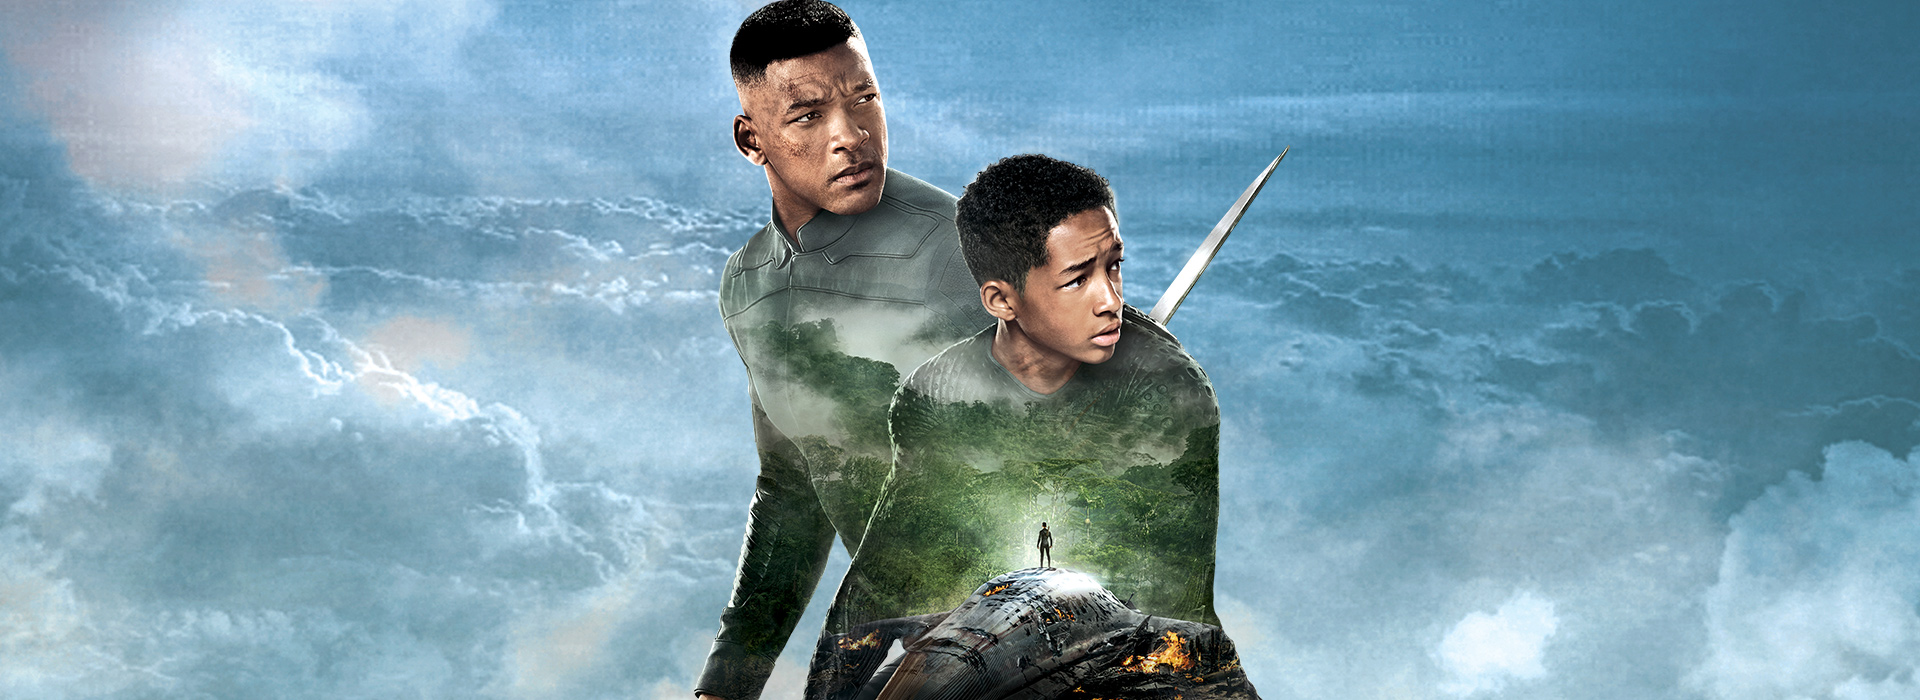 Movie poster After Earth